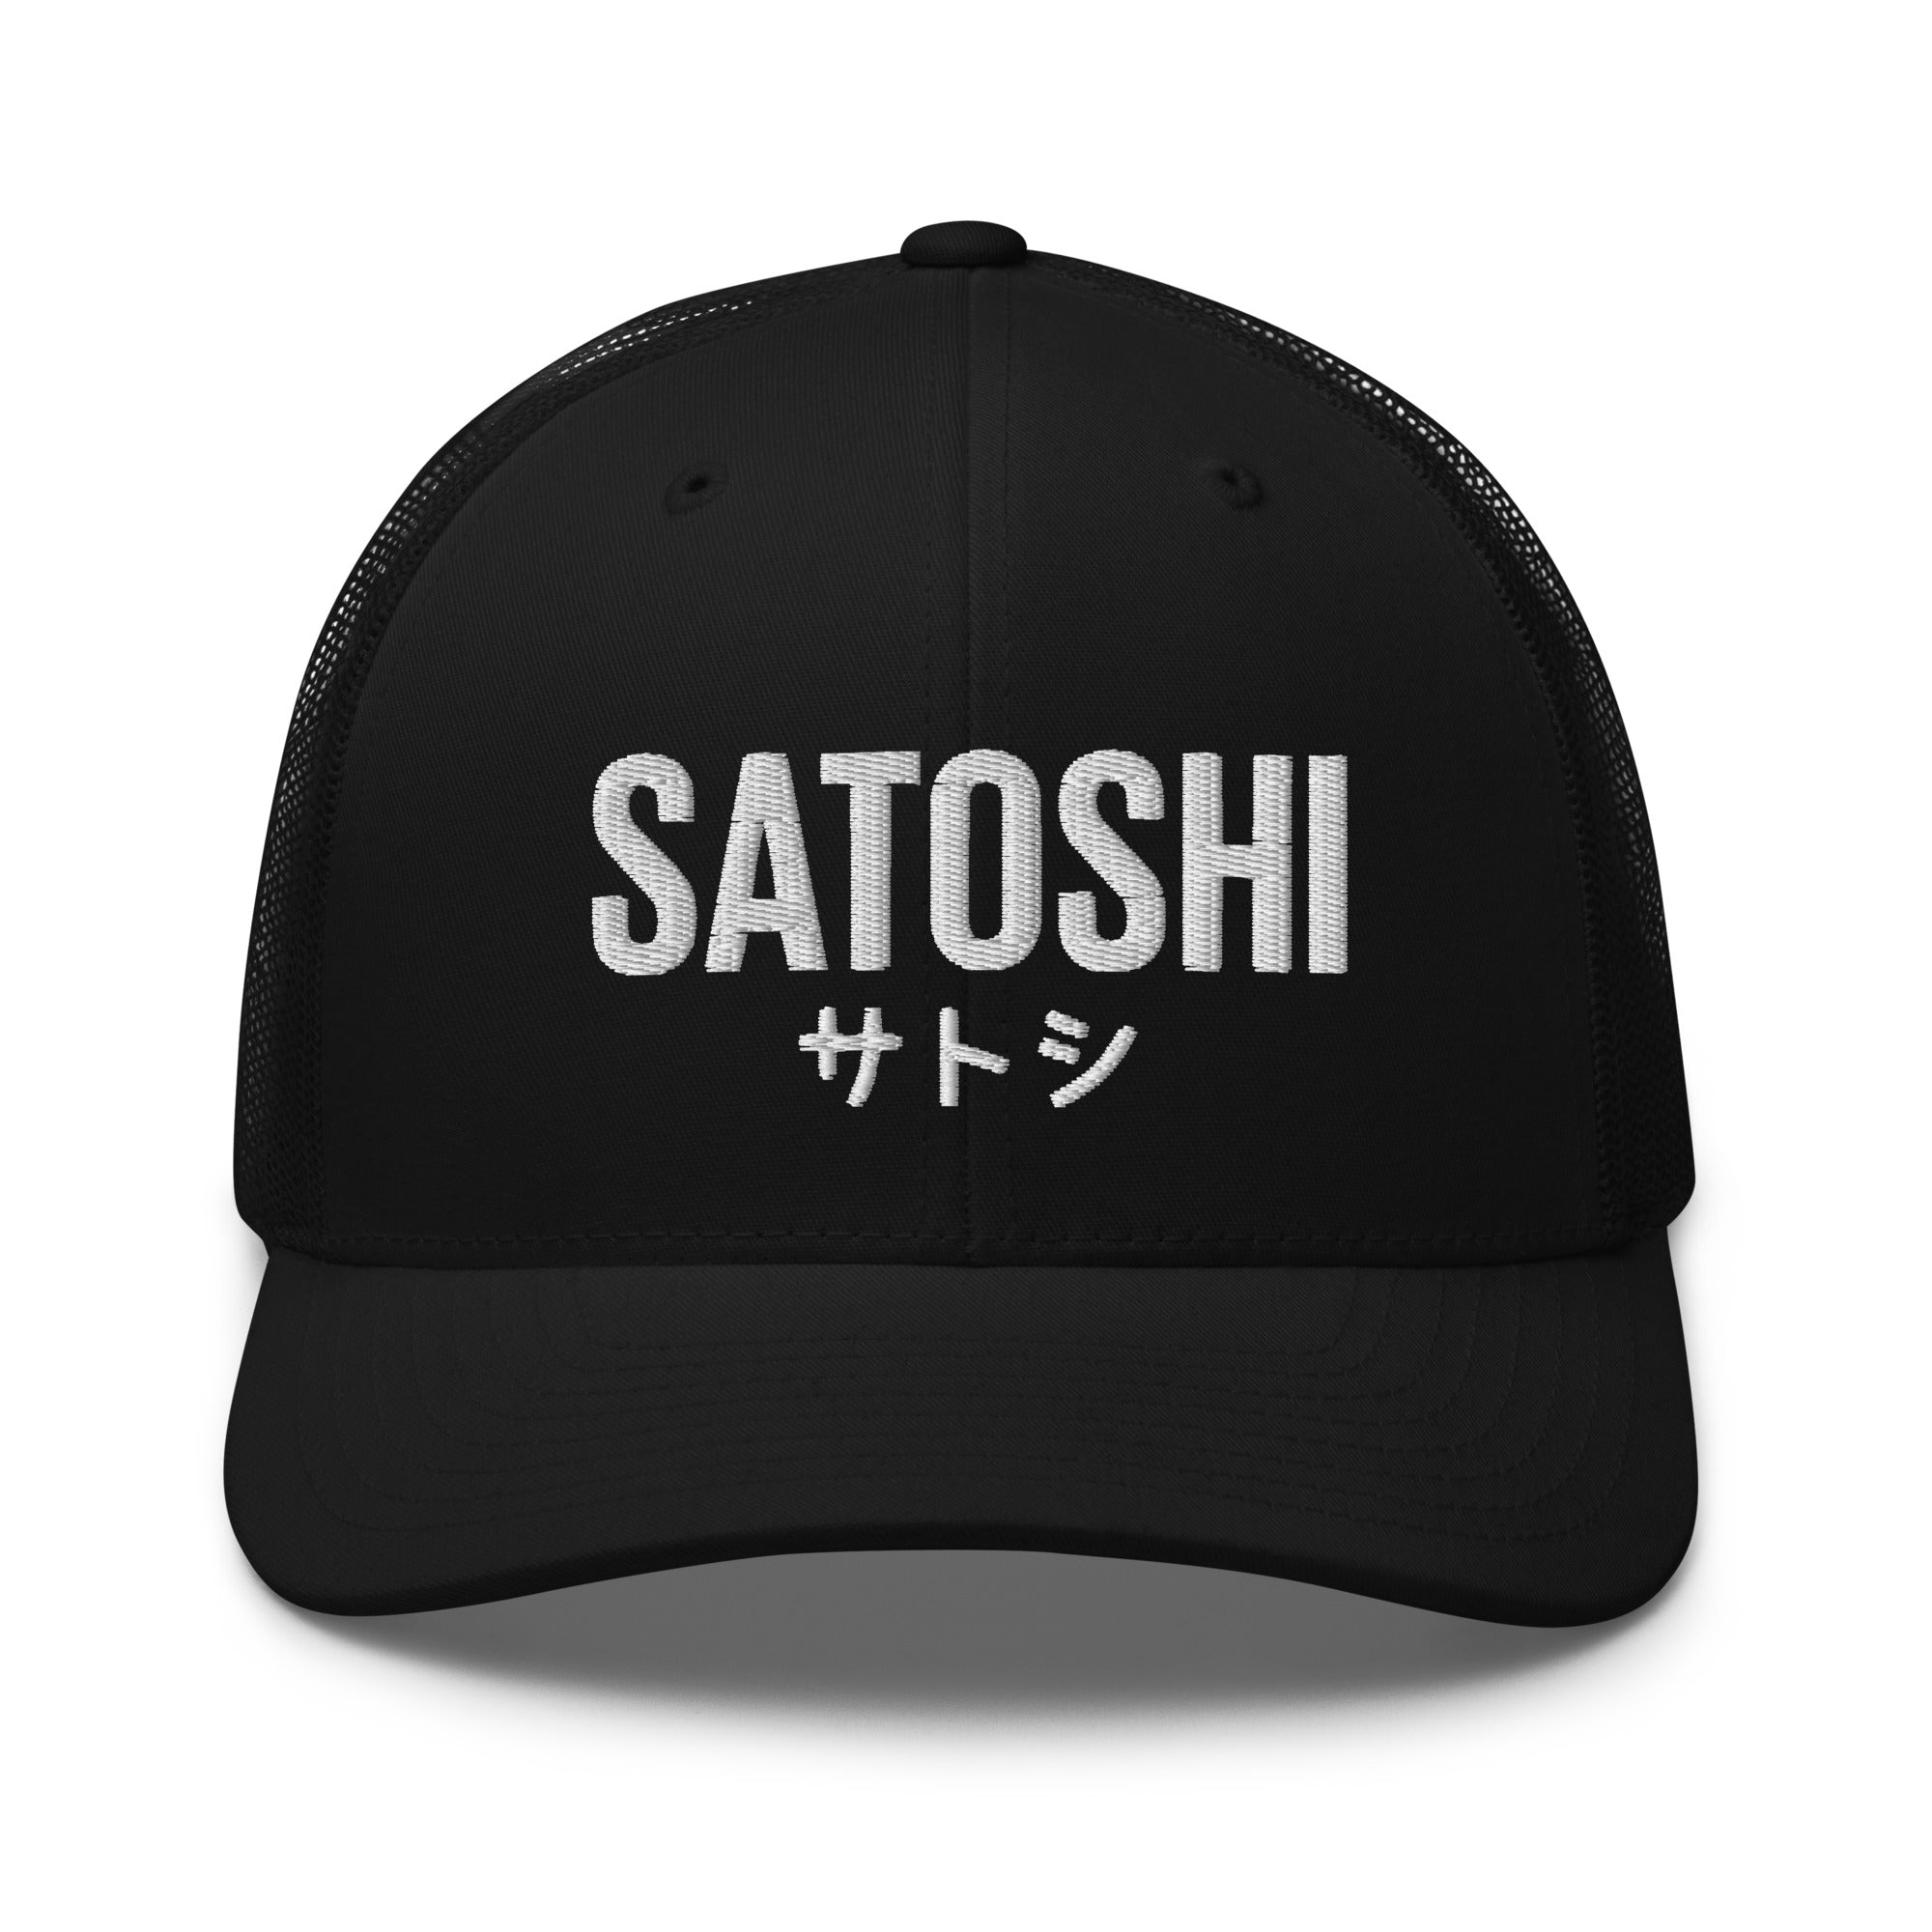 Bitcoin Hat - The Satoshi Hat features a bilingual embroidered design. Color: Black. Front view.